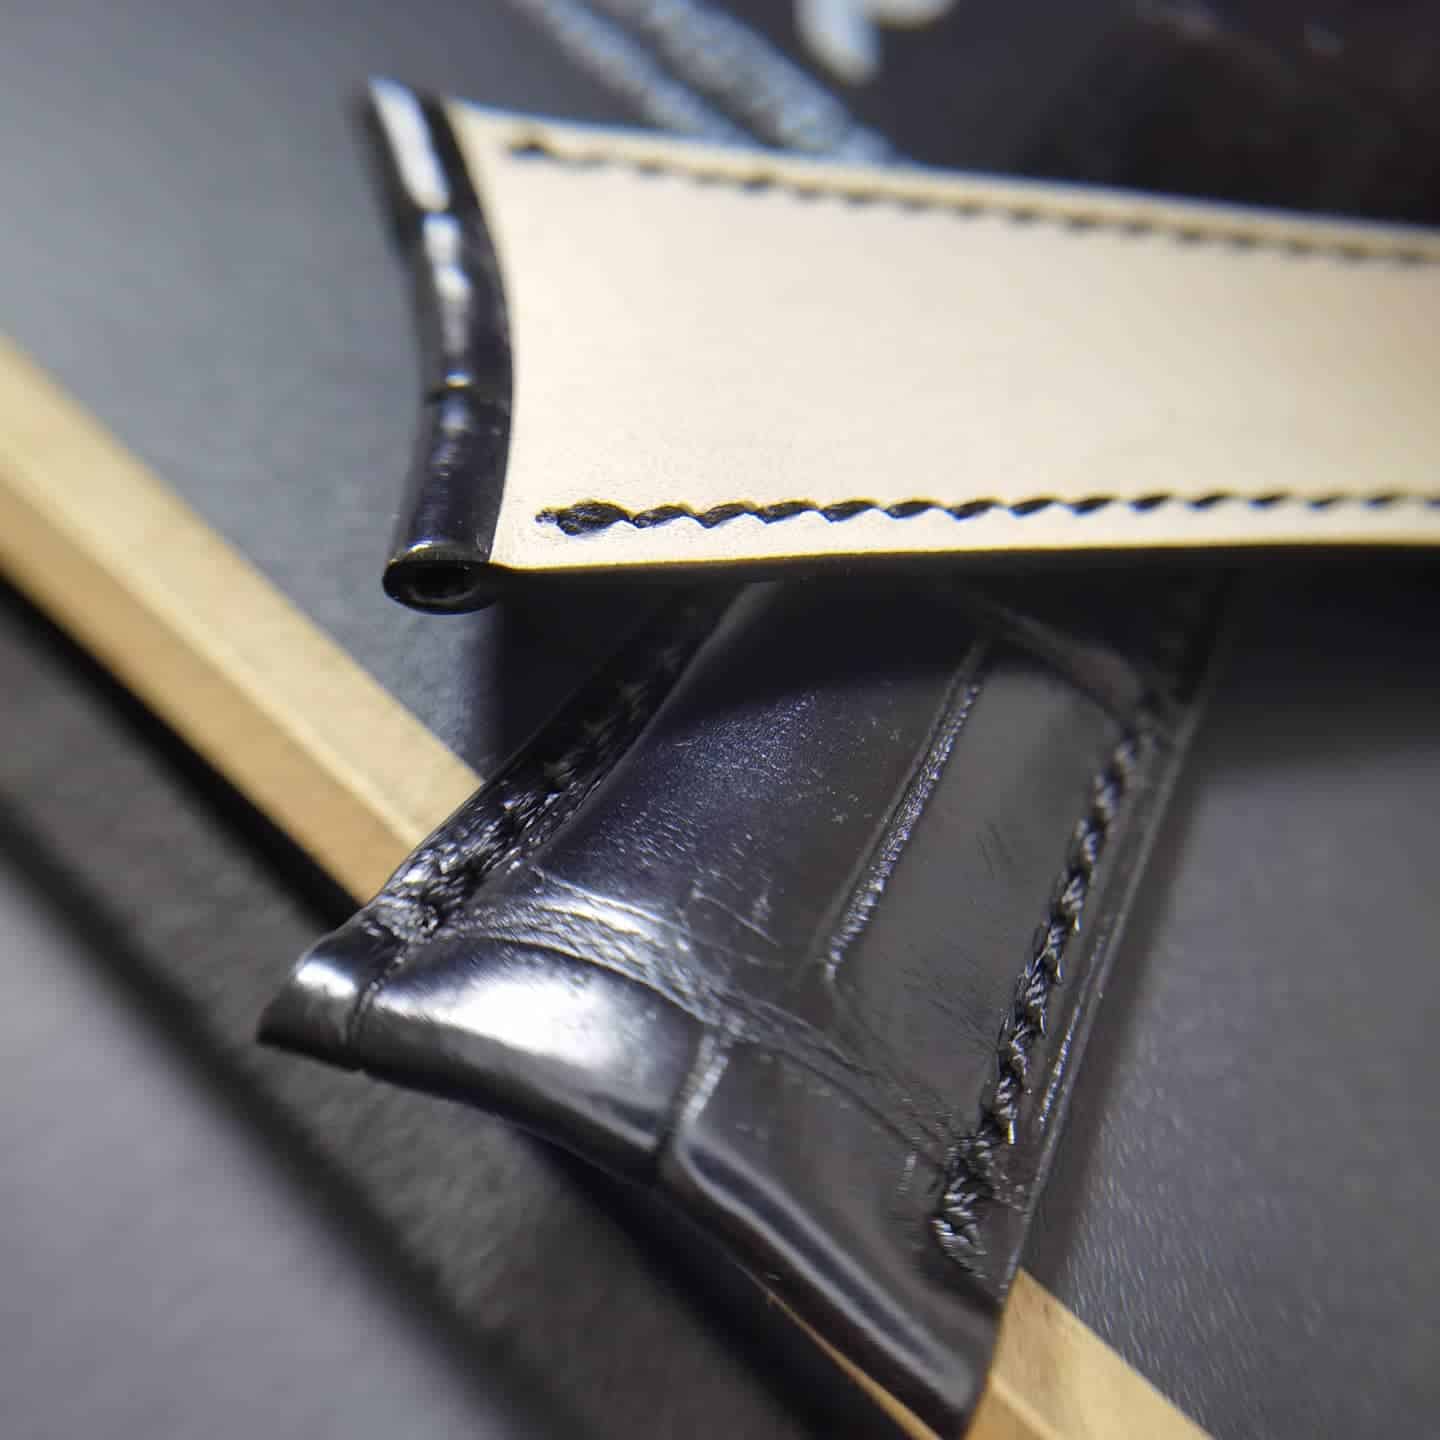 Curved end Rolex Cellini strap replacement black alligator leather